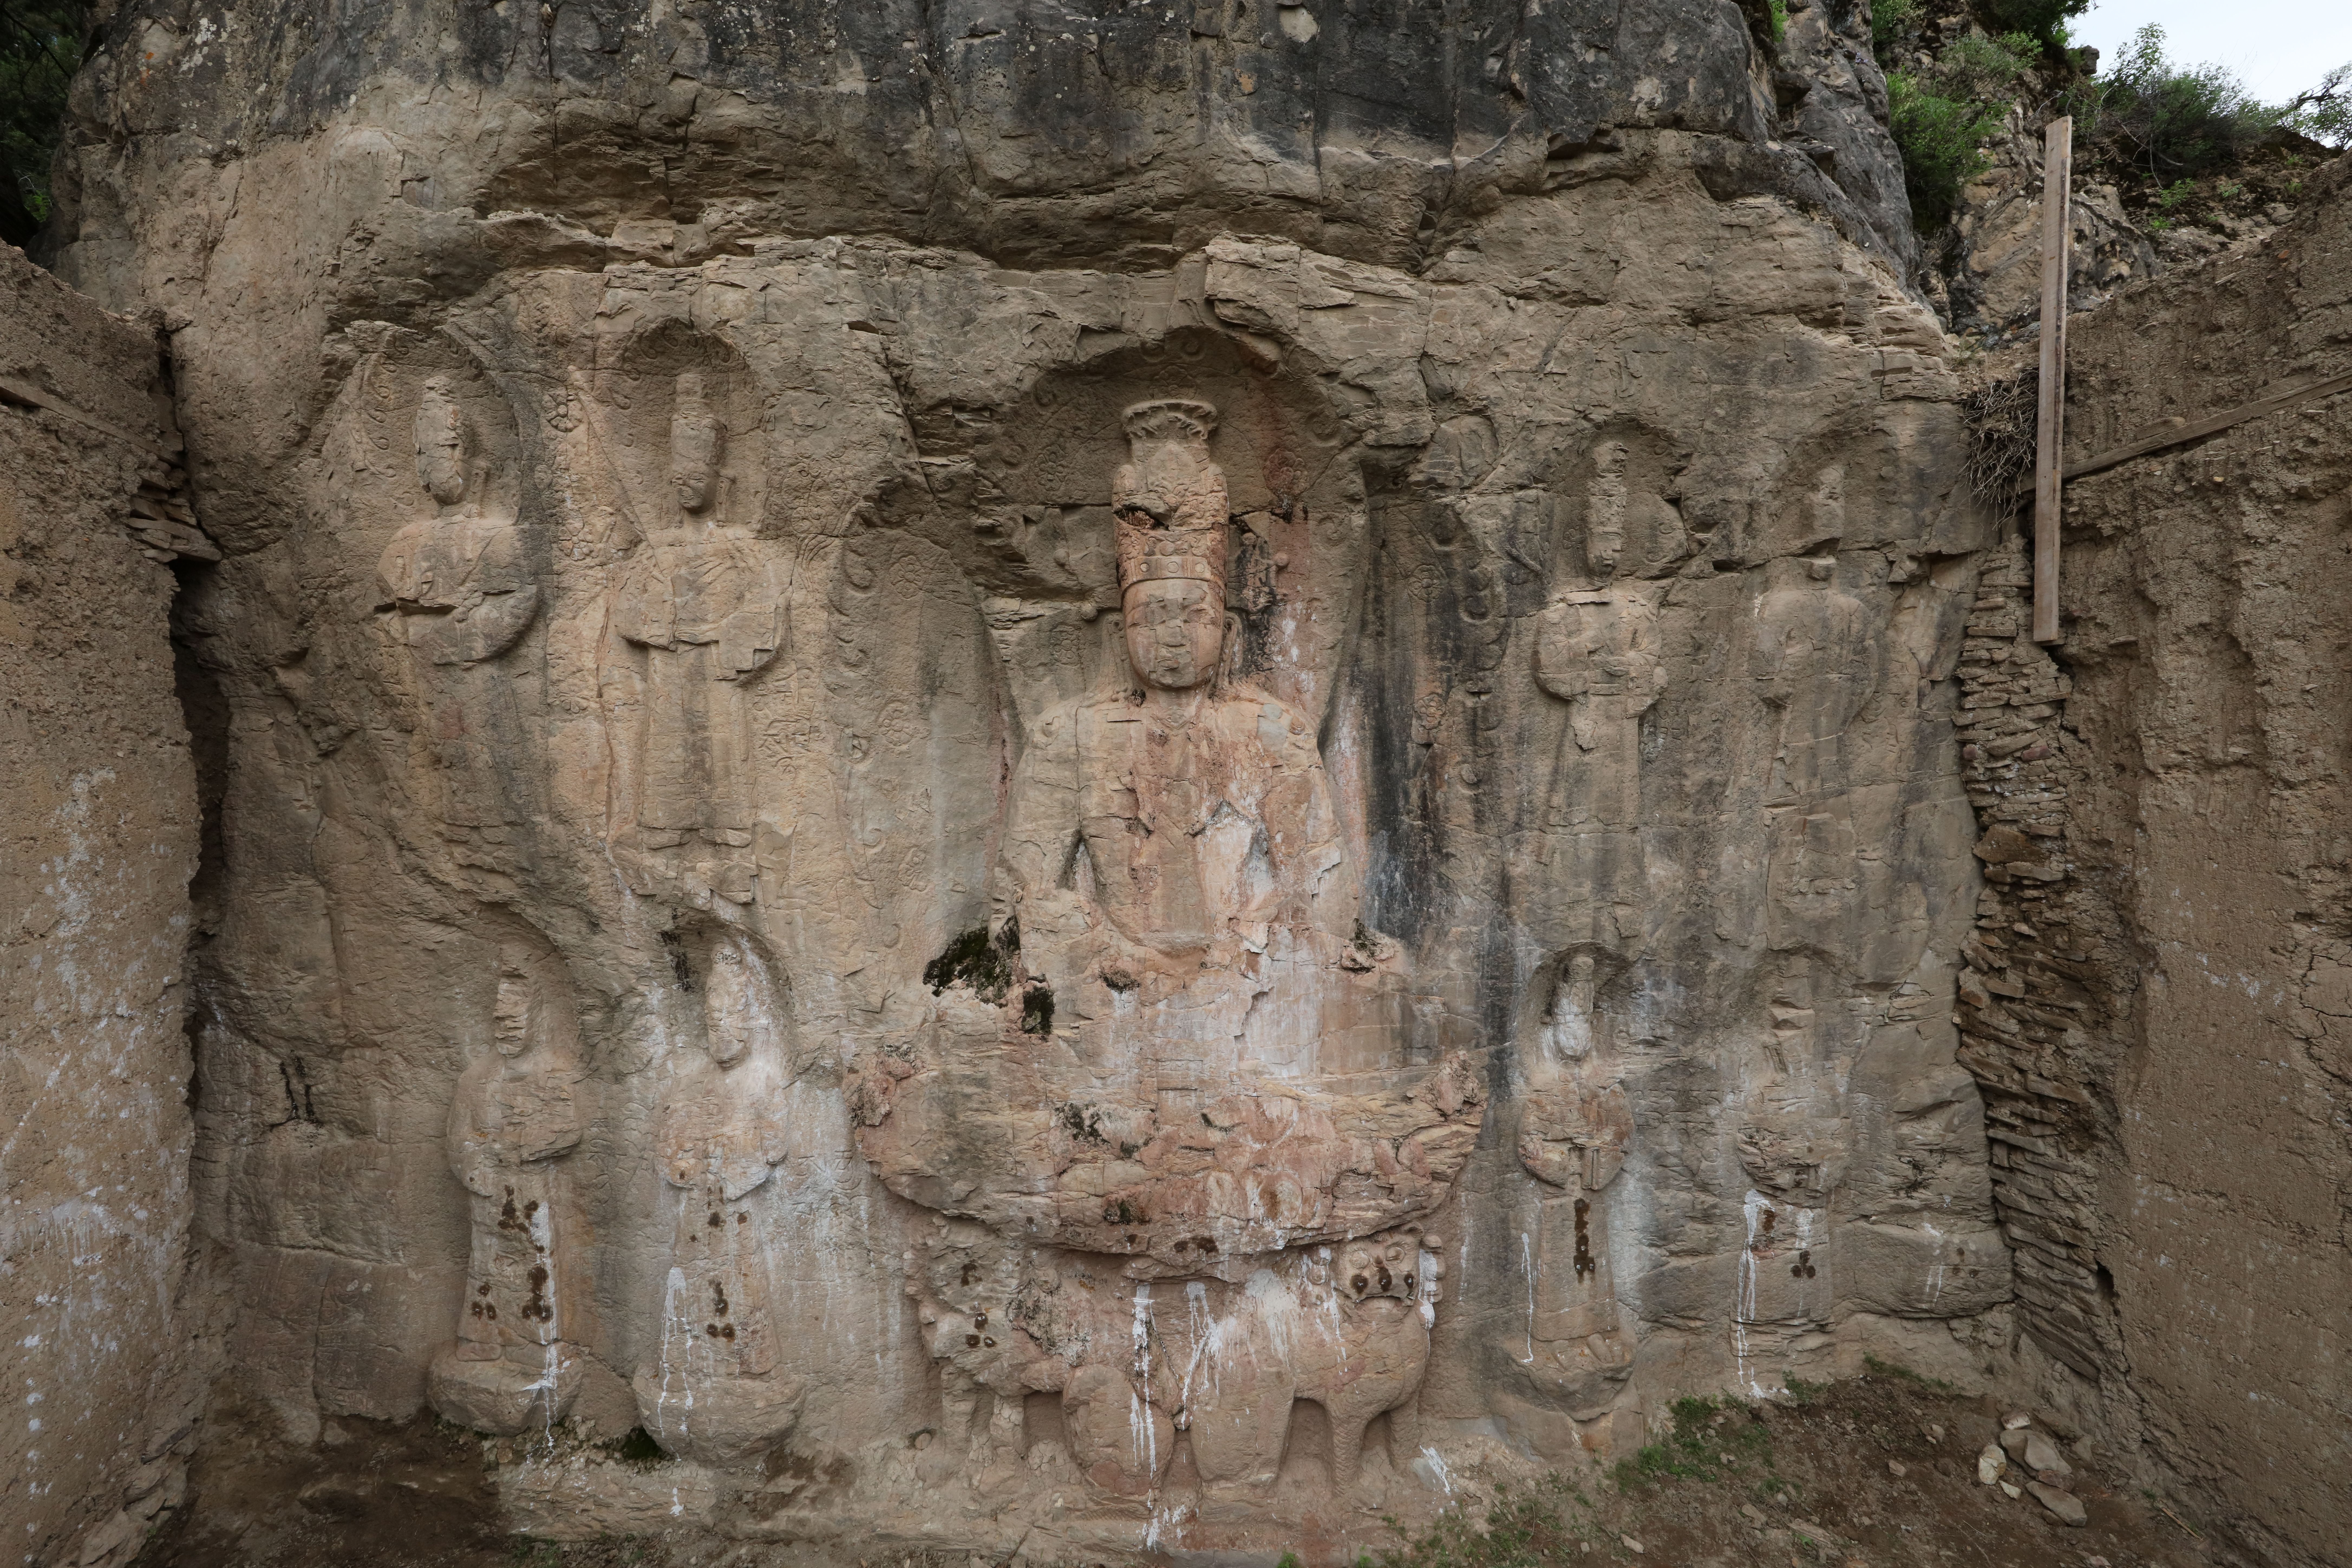 Wide view of monumental stone relief carved into excavated base of large rock